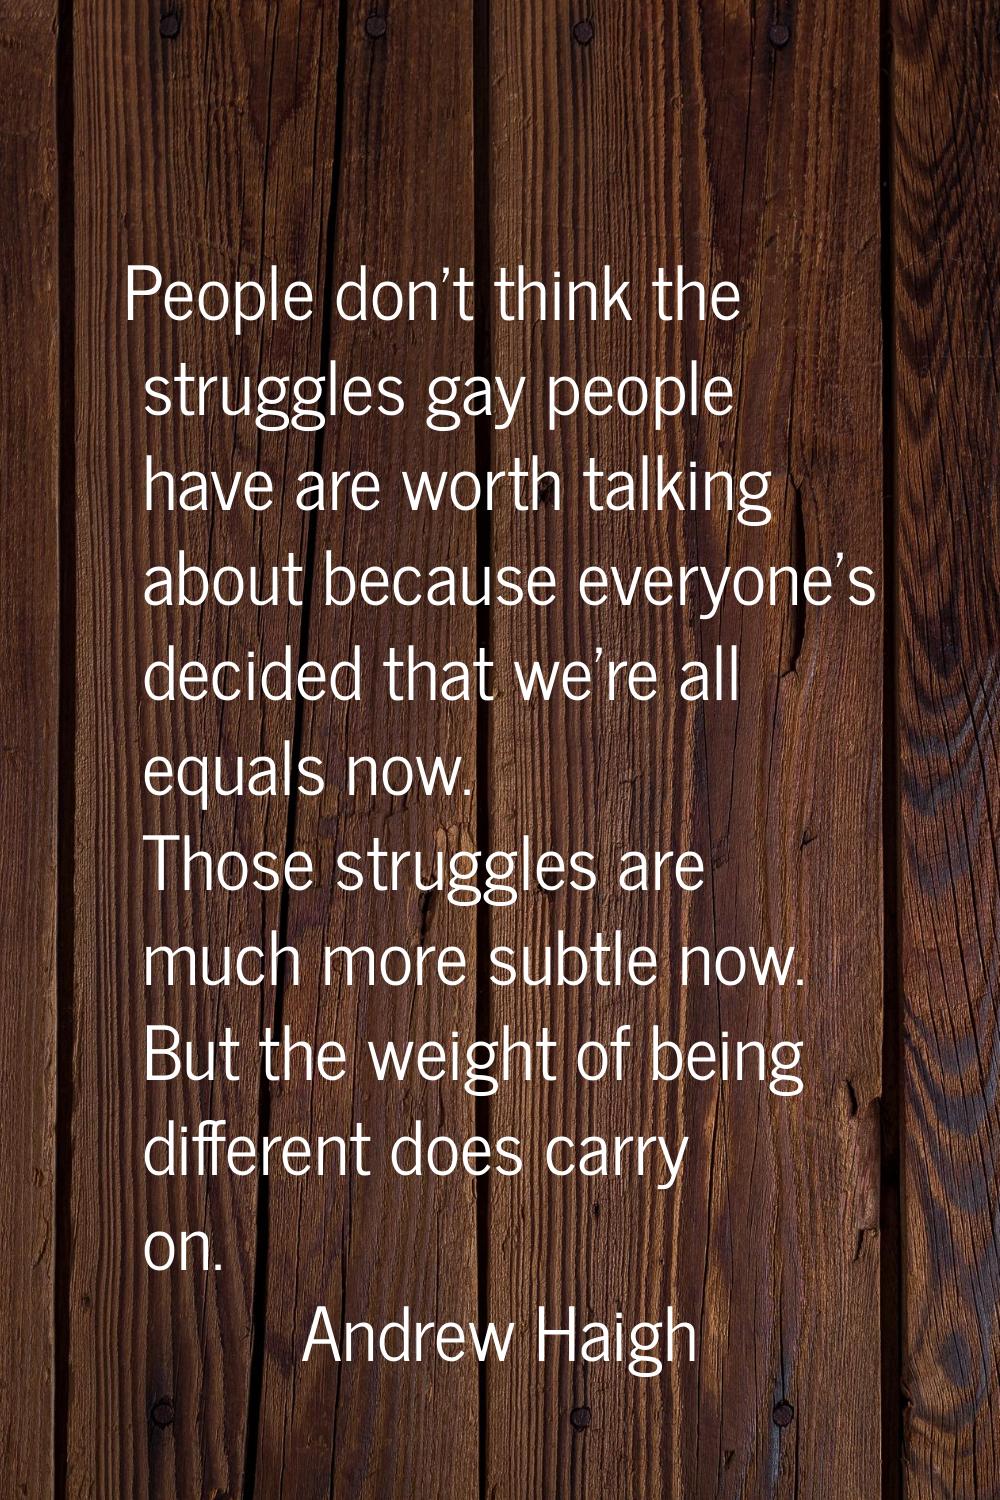 People don't think the struggles gay people have are worth talking about because everyone's decided